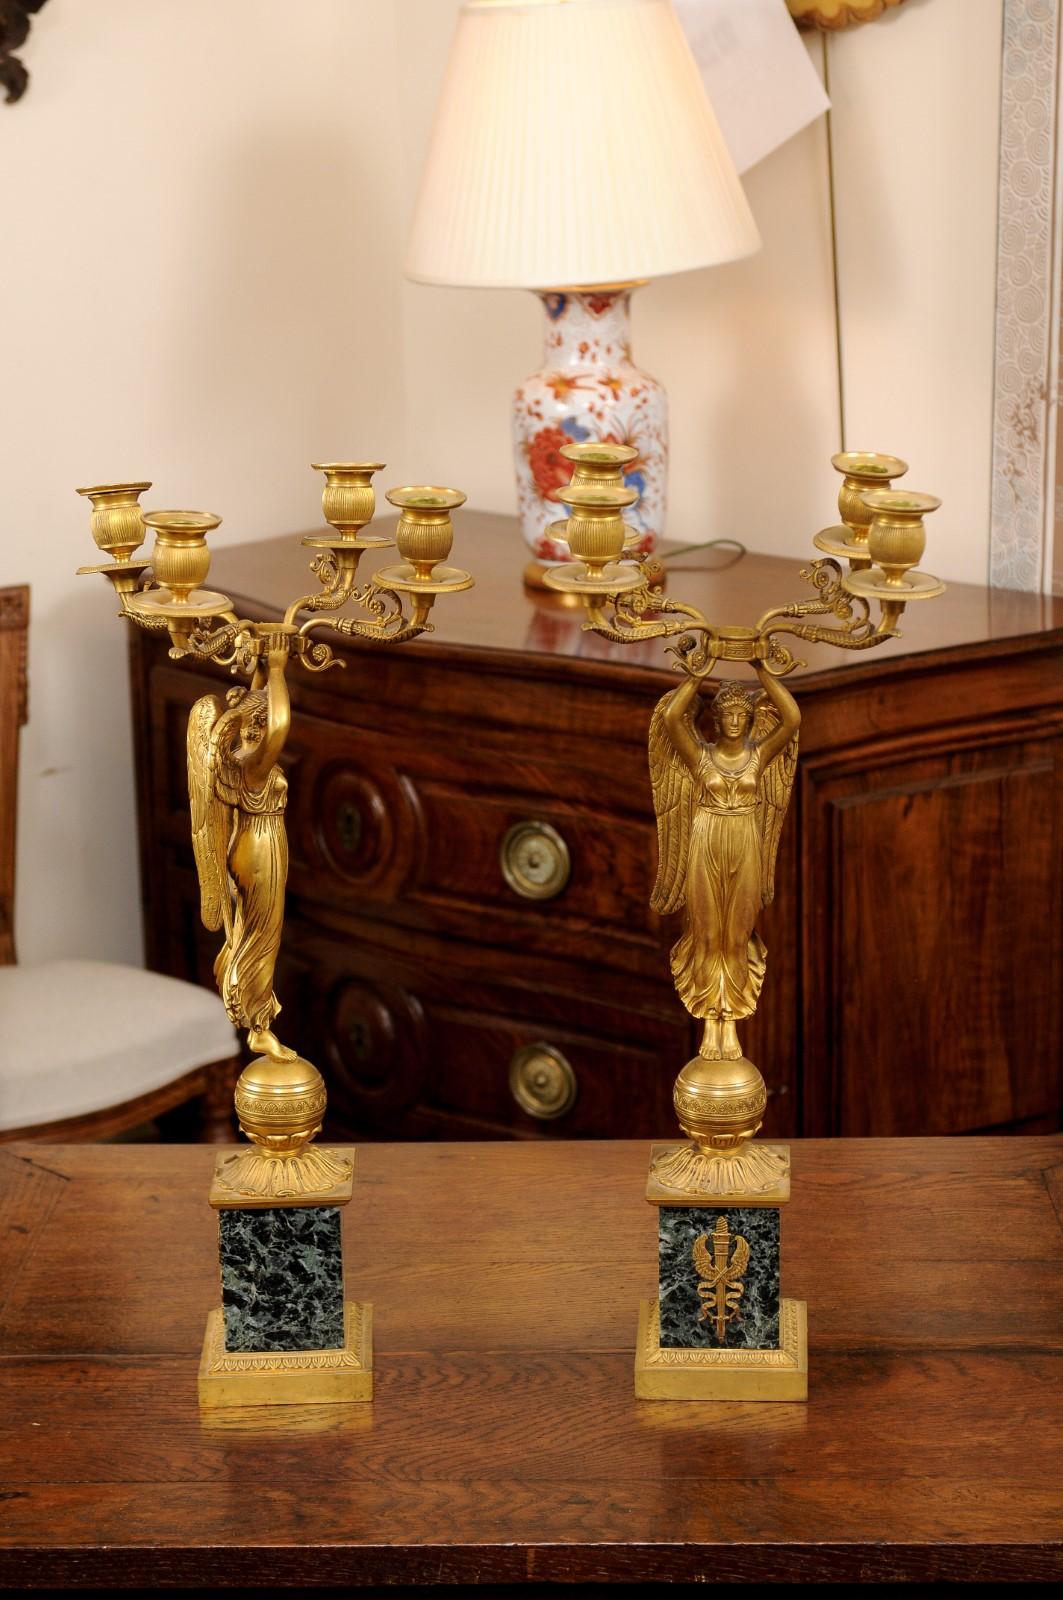 These pair of Empire candelabras feature angles holding 4 candleholders atop a green marble base.